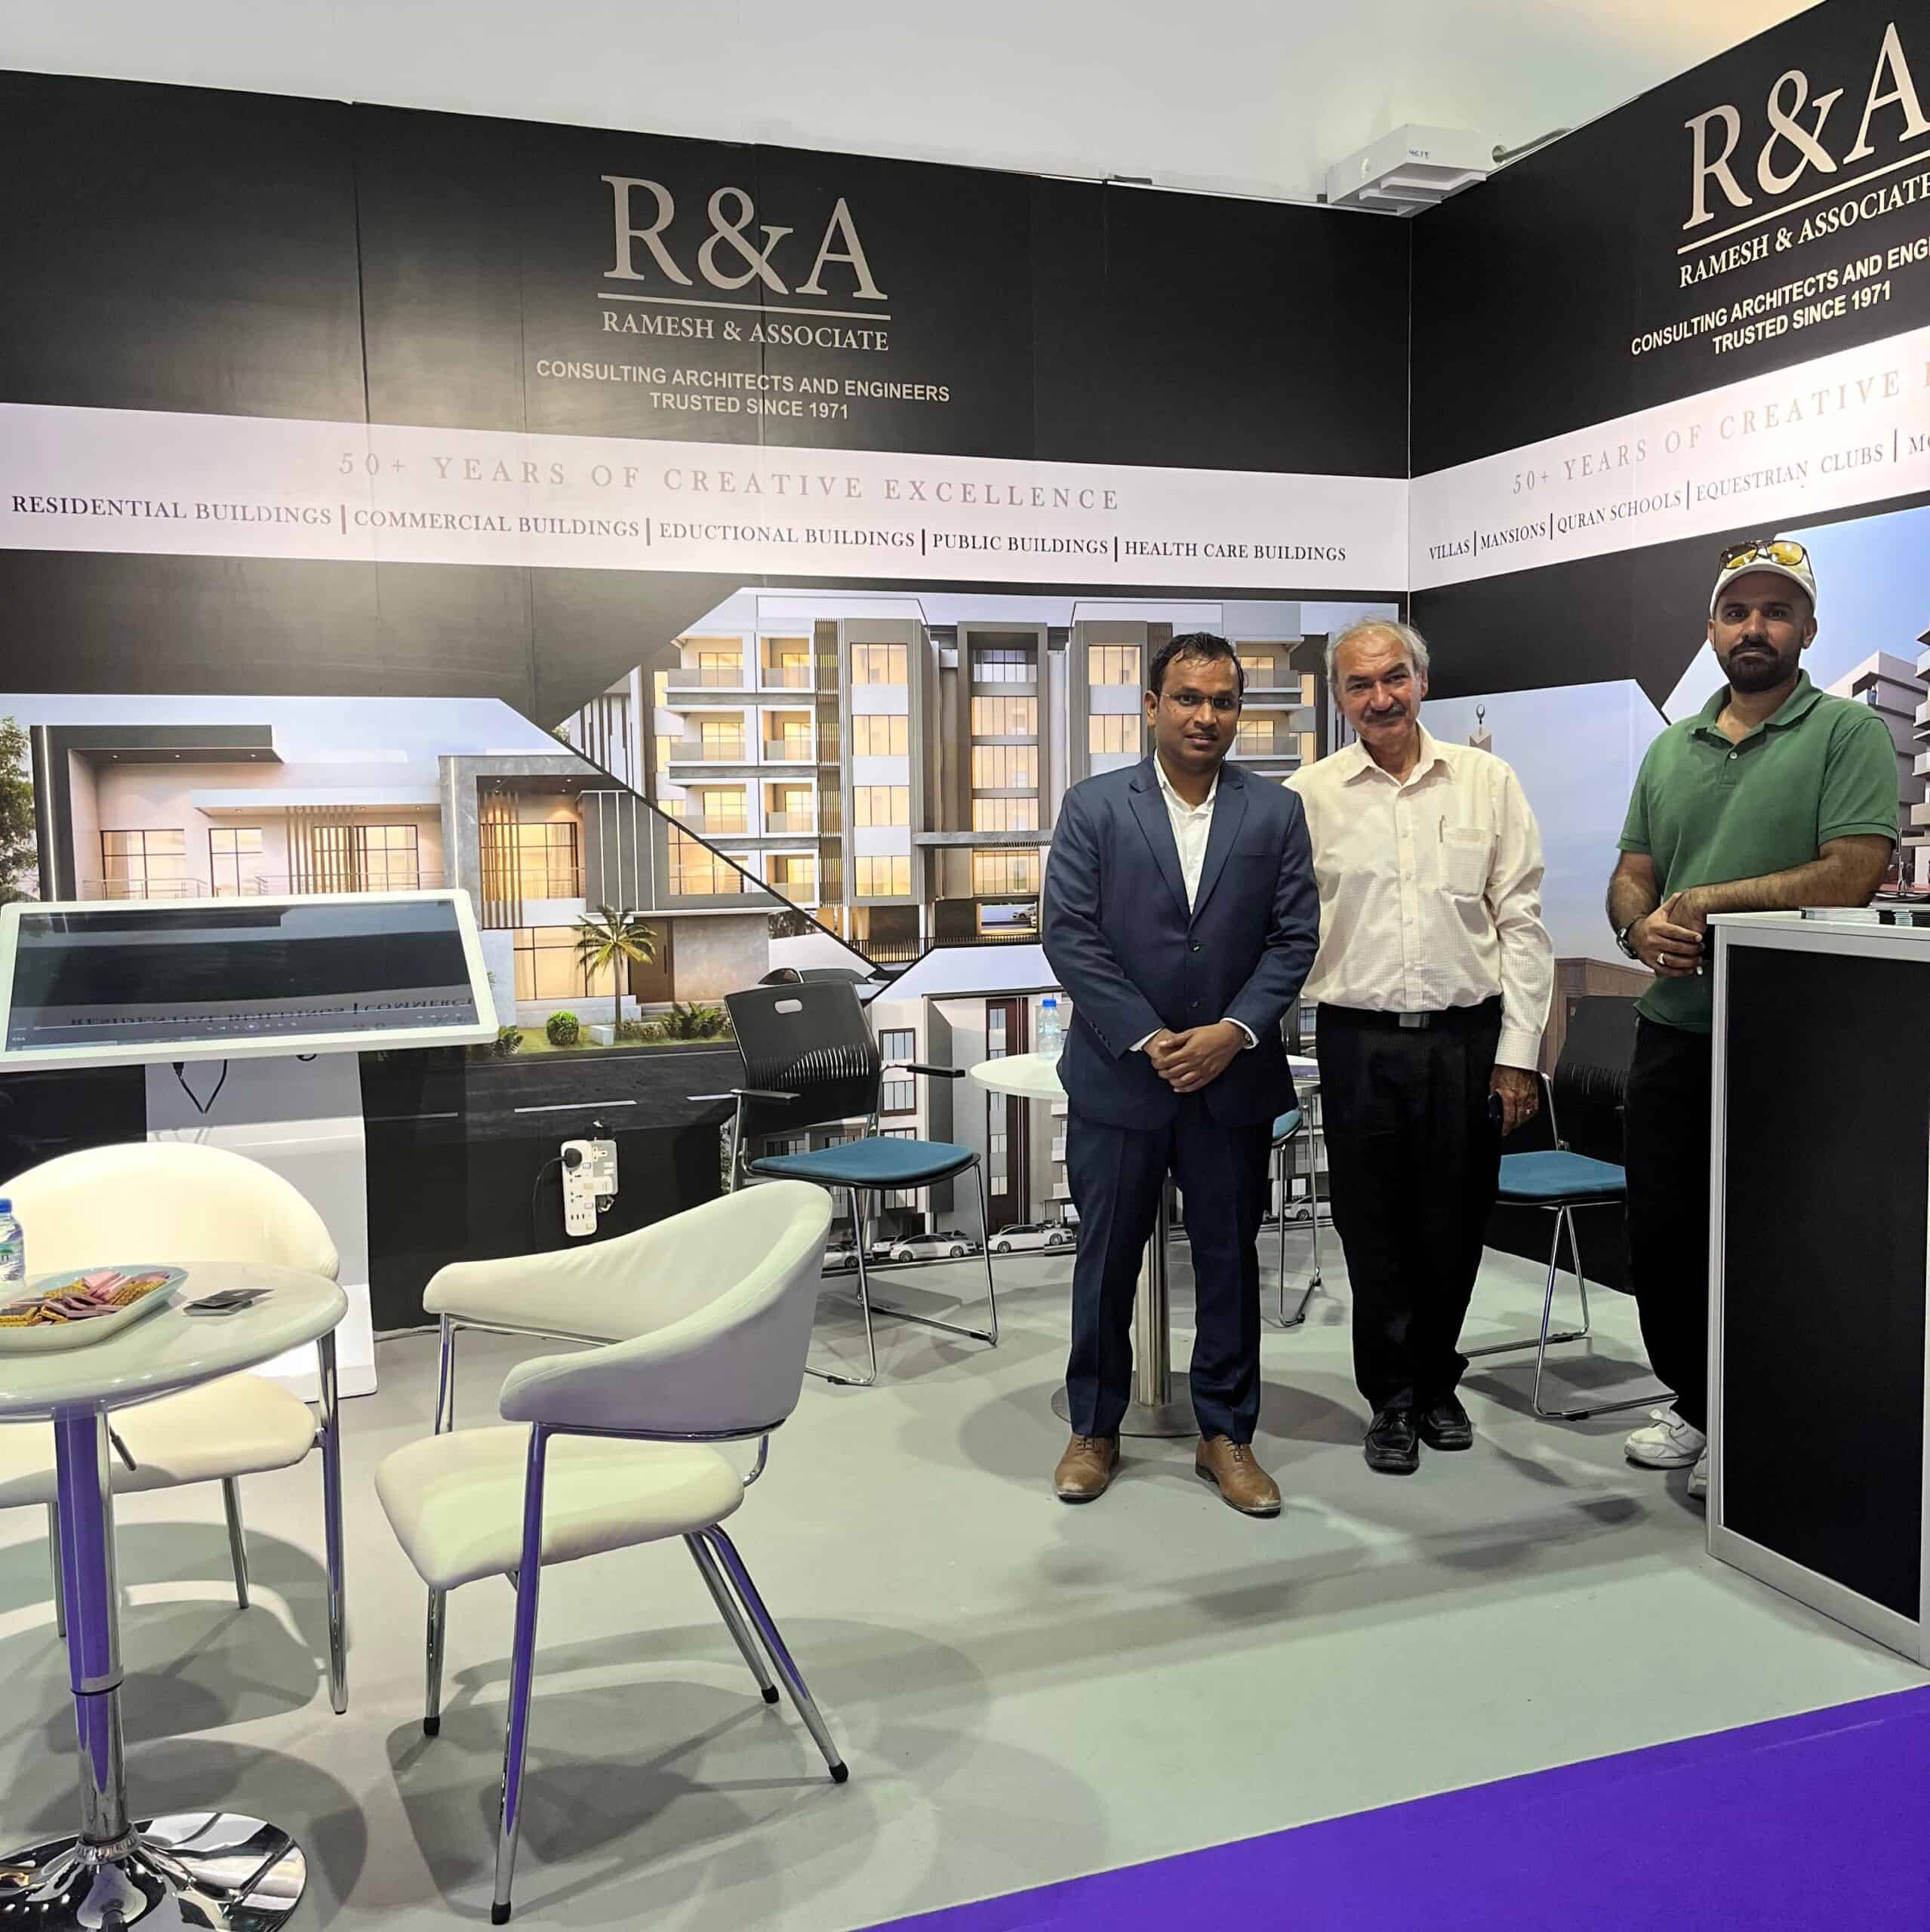  Architect of Record (AOR) Services by Ramesh & Associate (R&A)